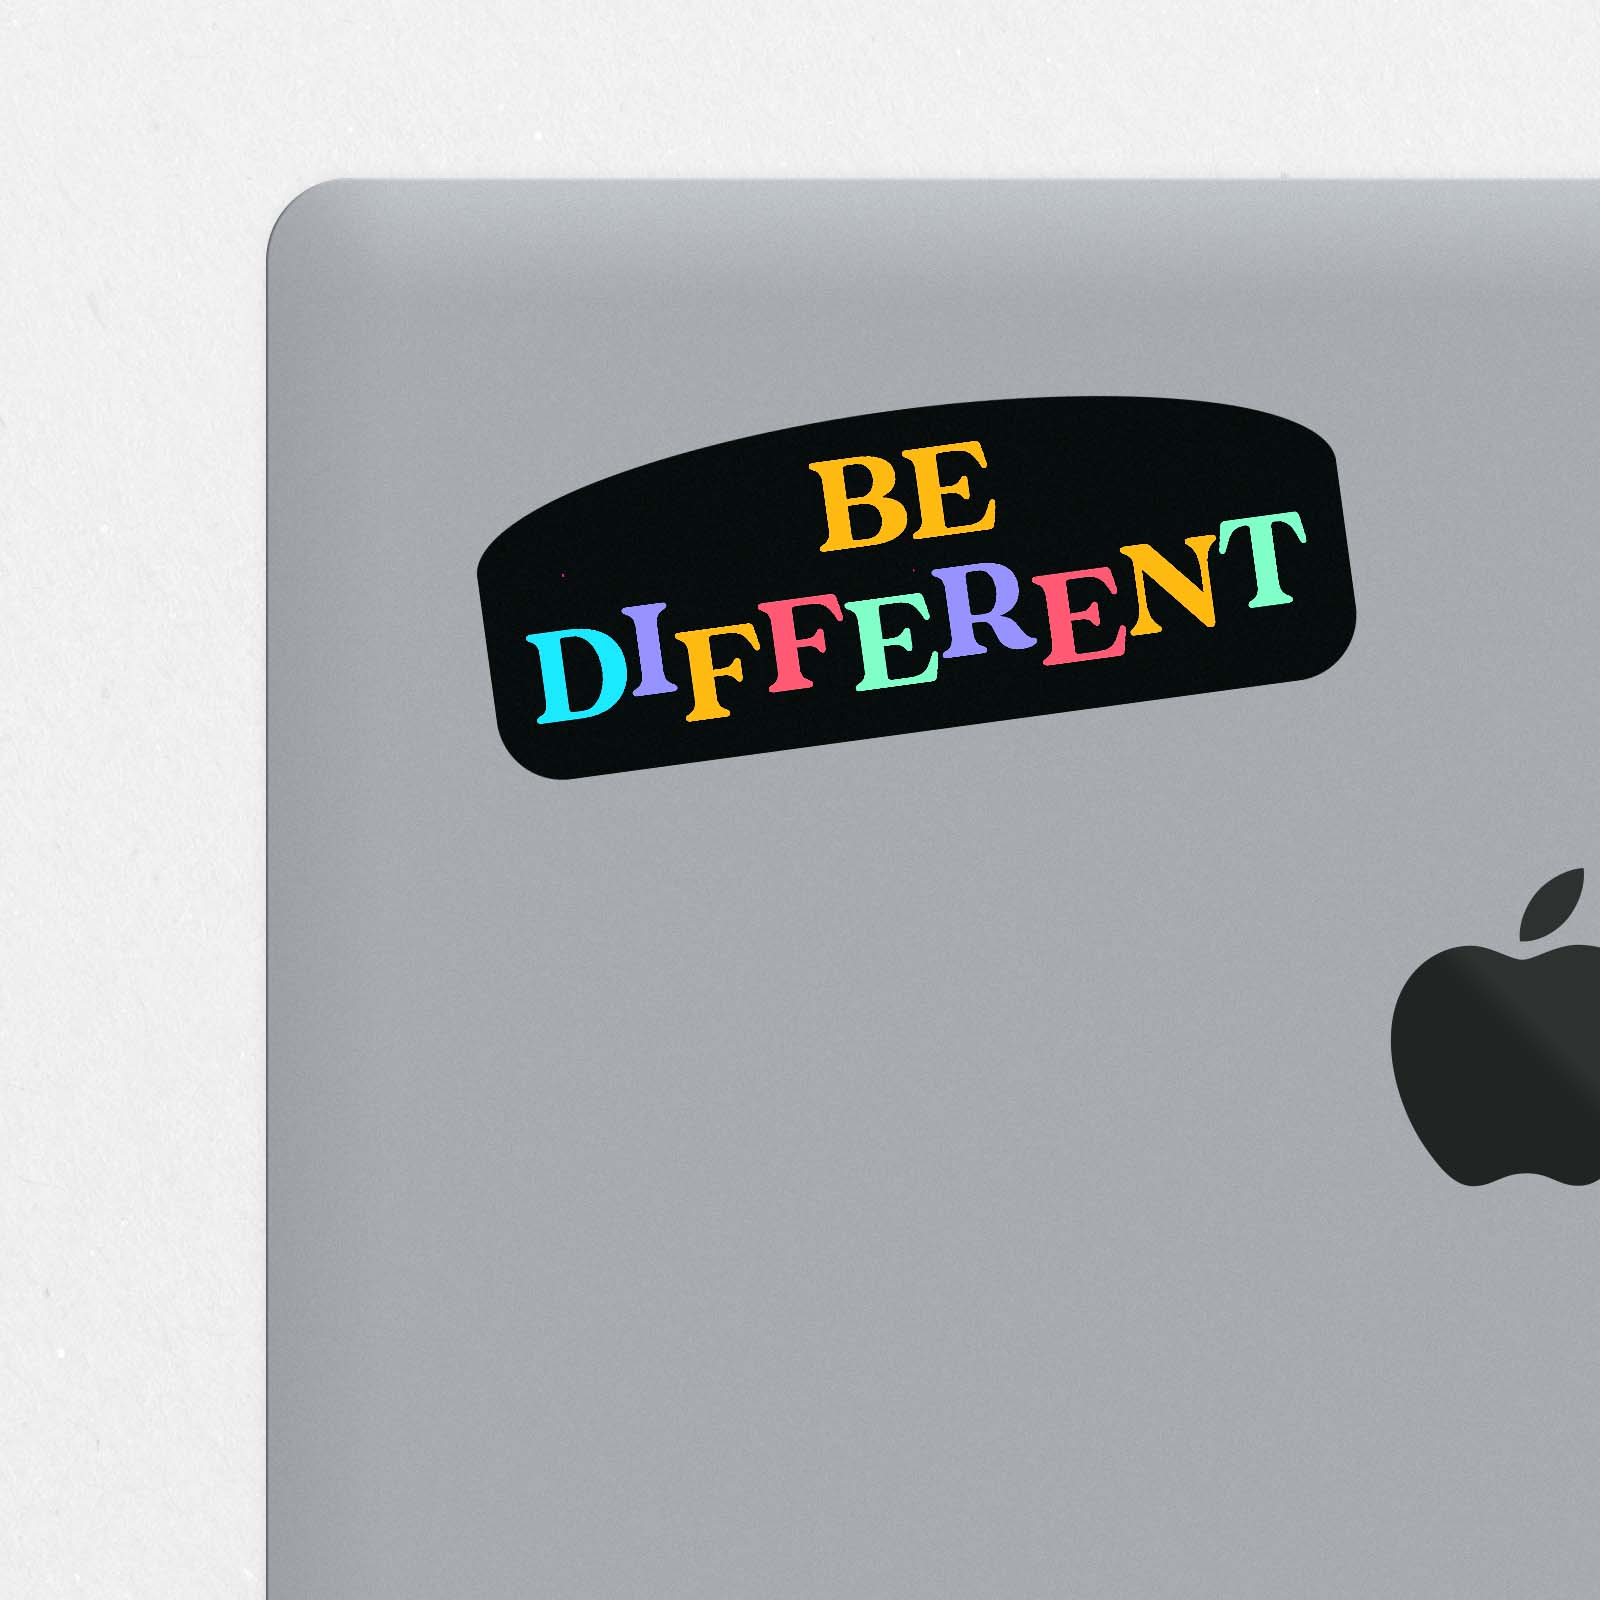 x2 Be Different Printed Stickers